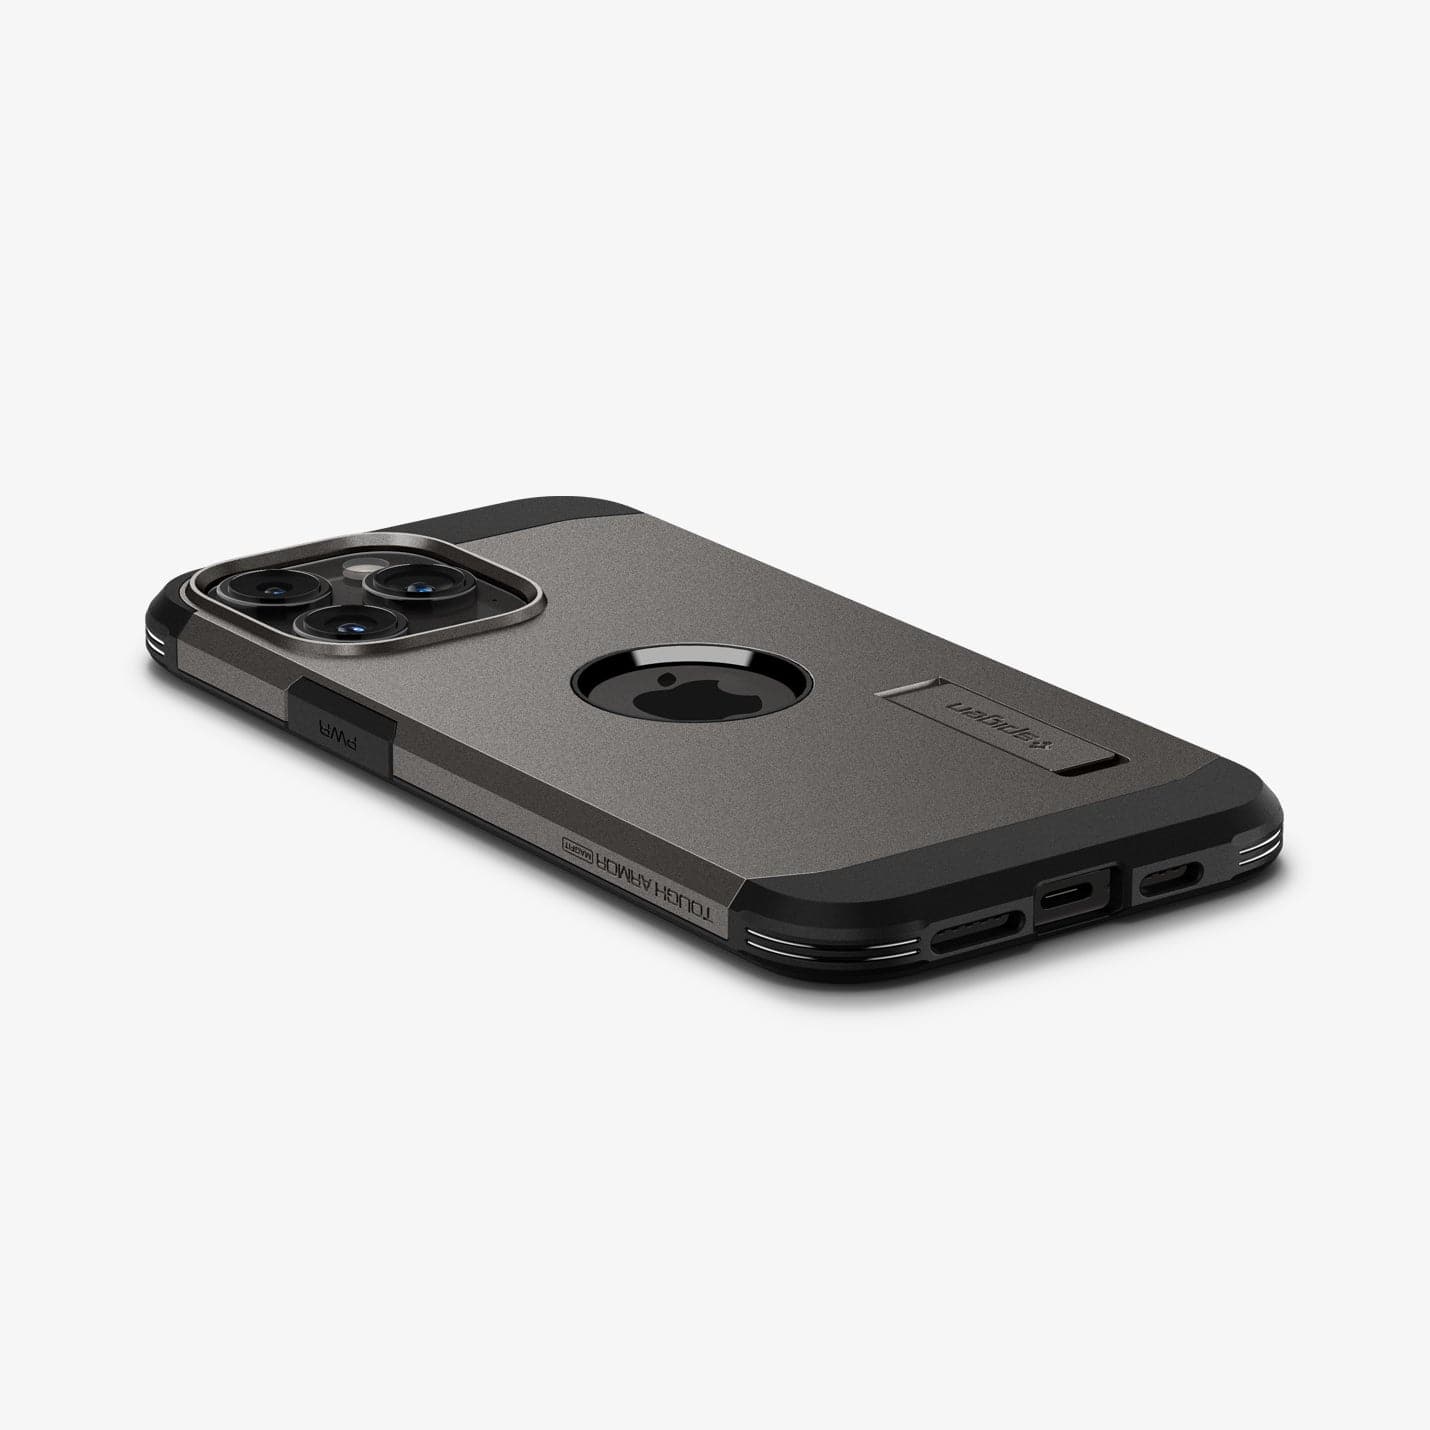  ACS06593 - iPhone 15 Pro Max Case Tough Armor (MagFit) in gunmetal showing the back, side and bottom